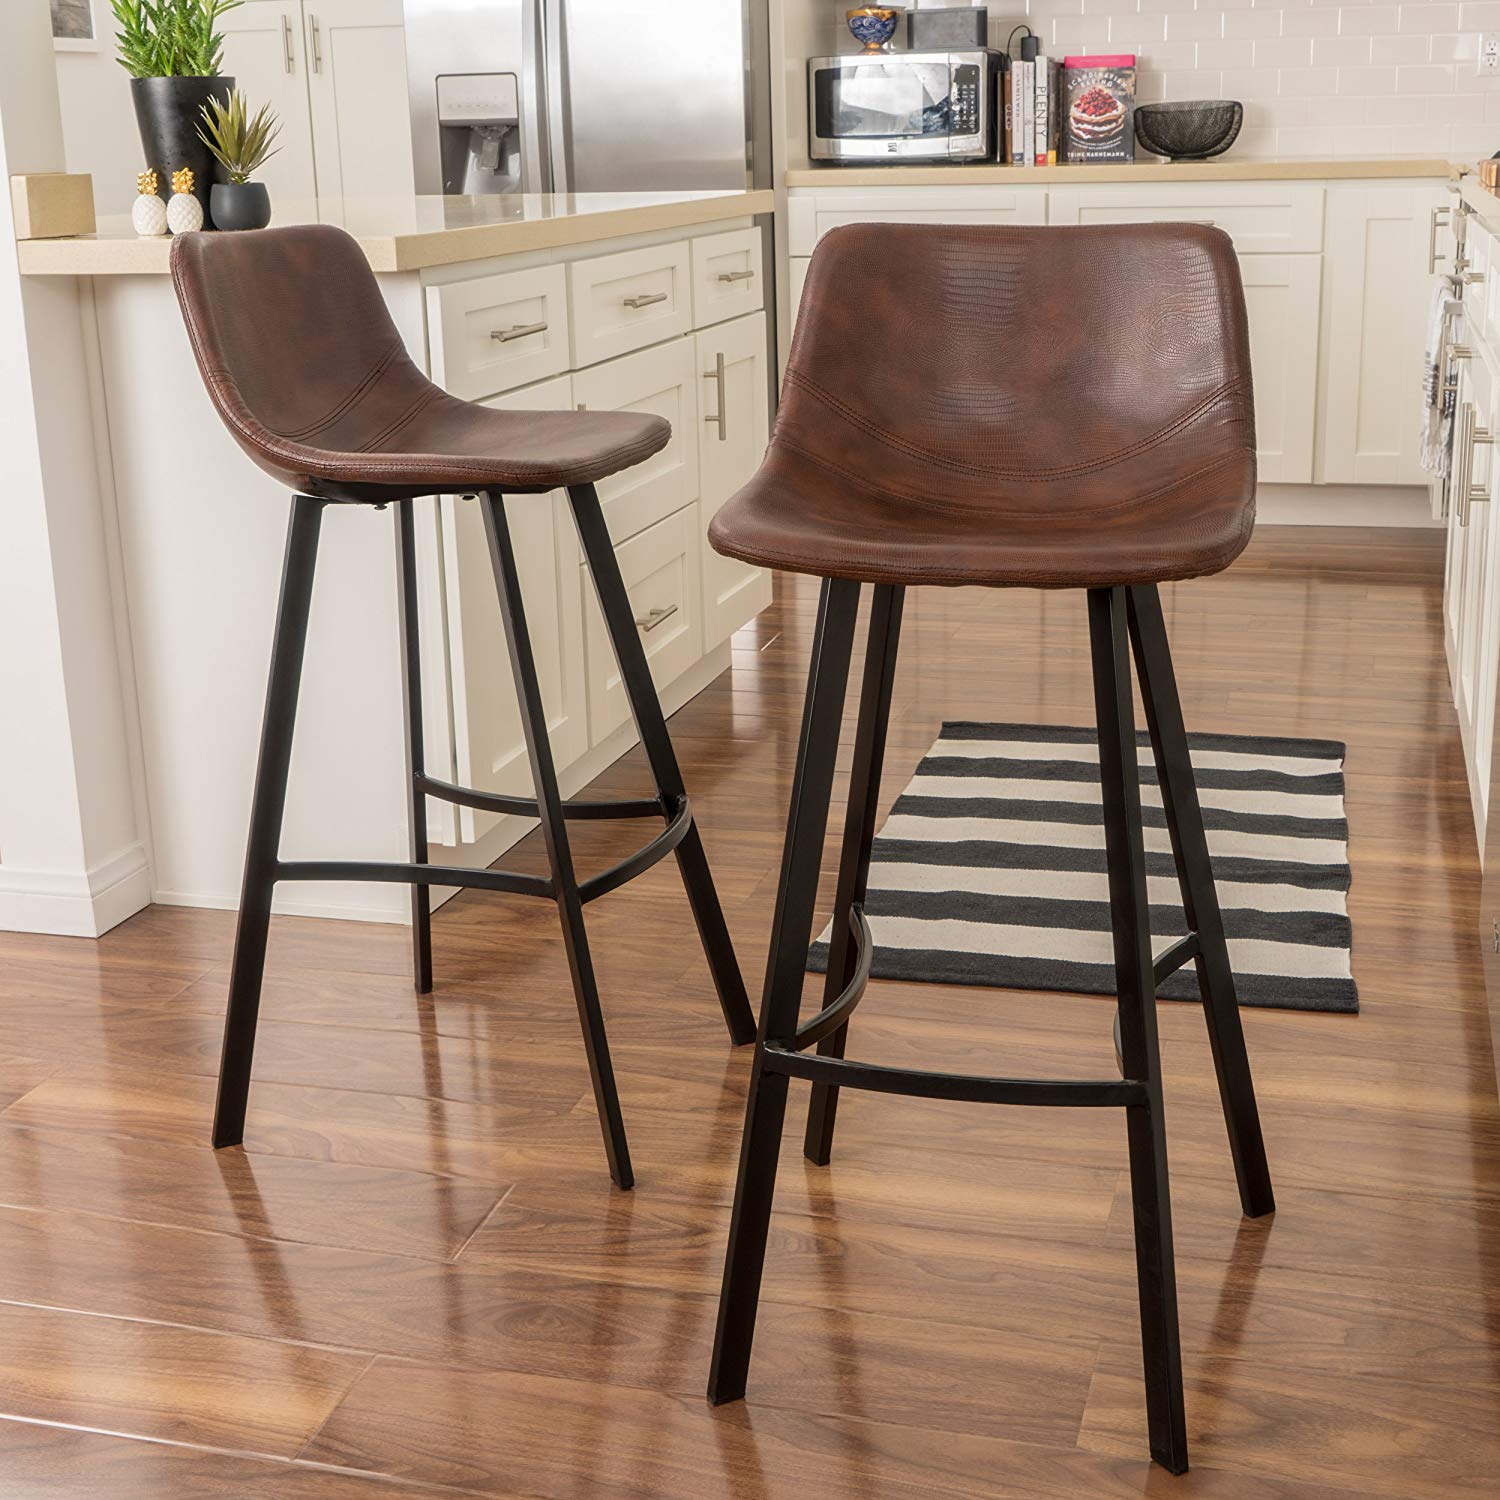 The Top 10 Best Bar Stools Of 2021, Mary Kate Bar Stool